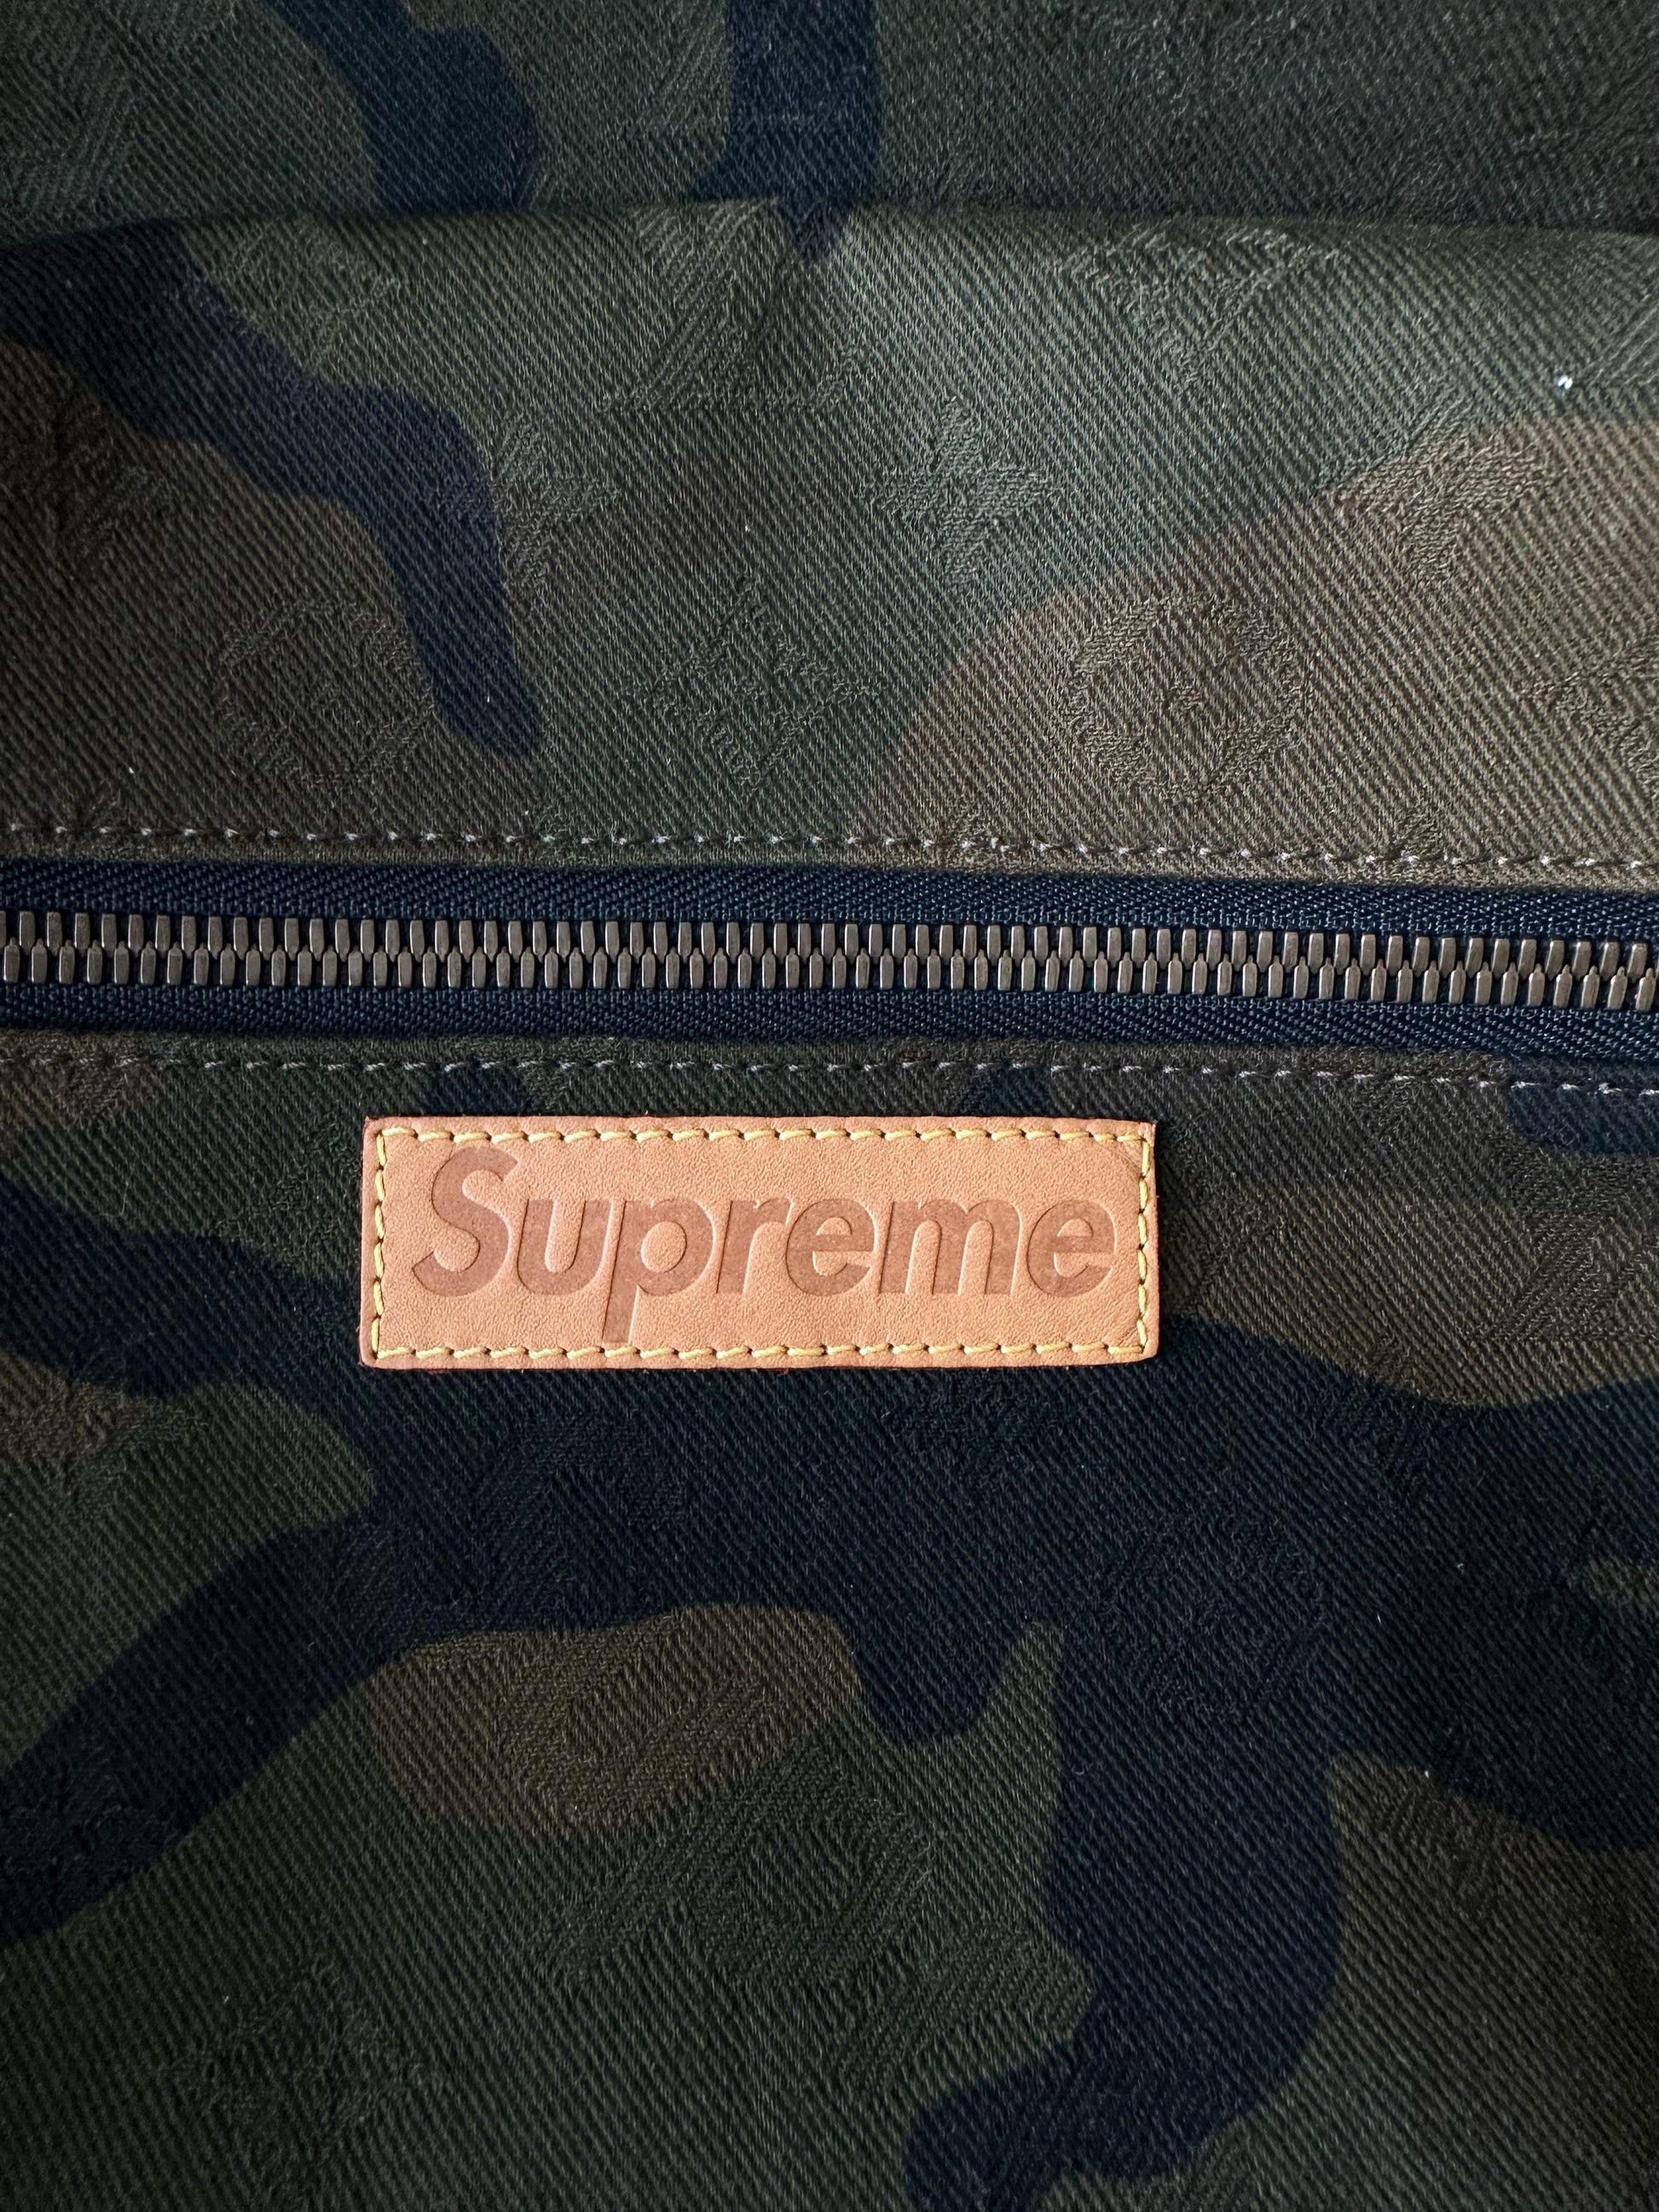 Louis Vuitton Supreme Monogram Camo Apollo Backpack, 2017 Available For  Immediate Sale At Sotheby's